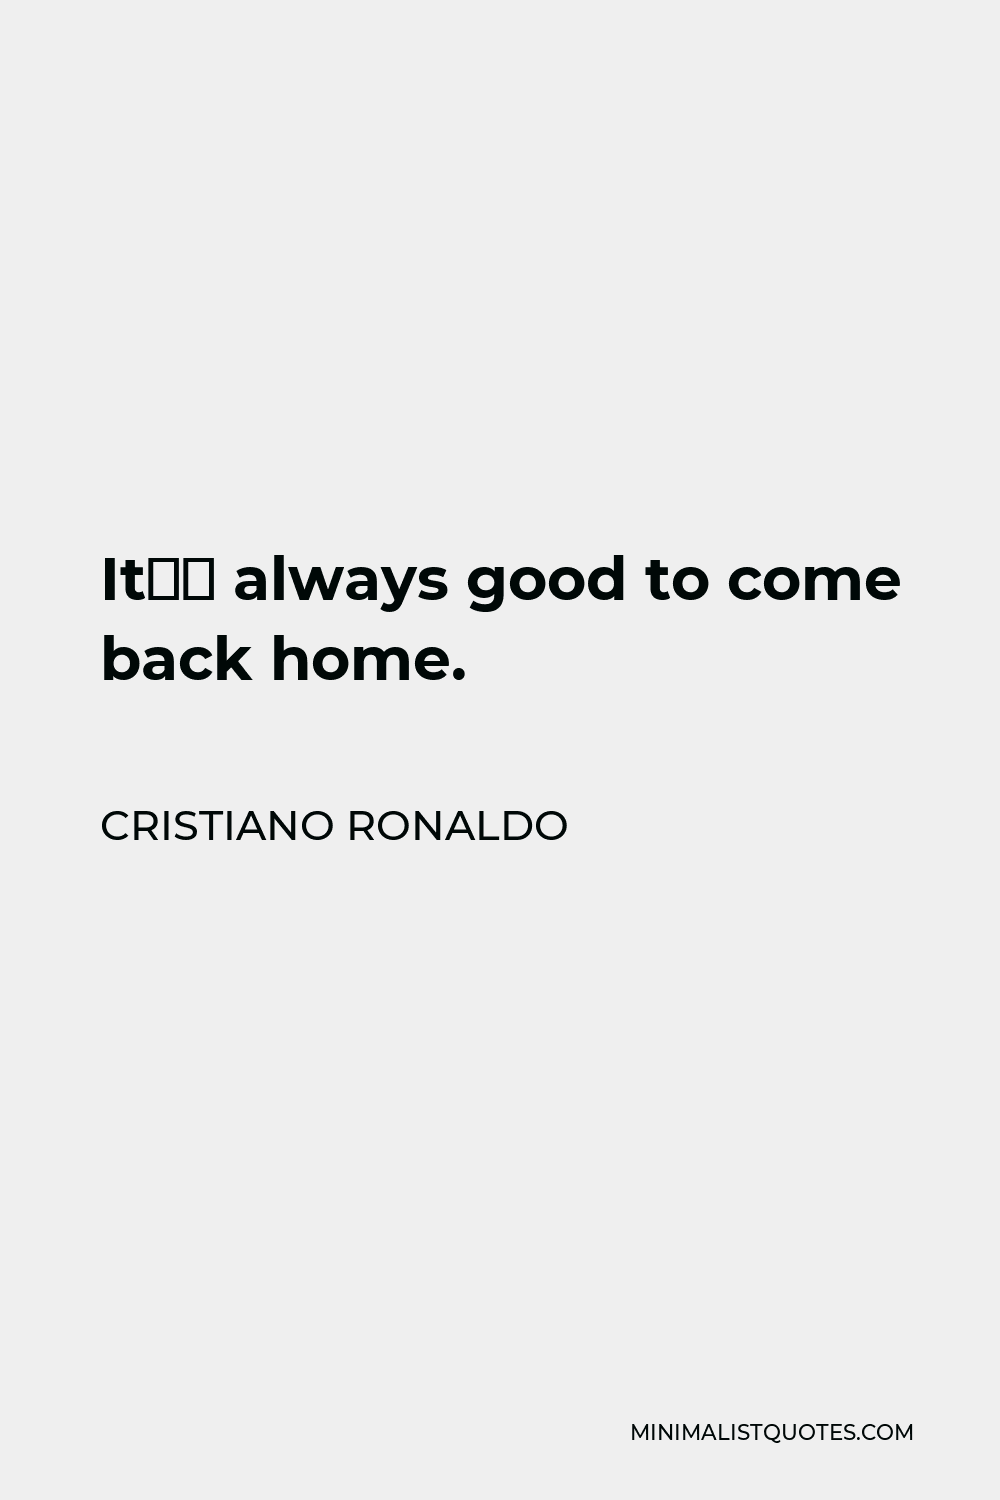 Cristiano Ronaldo Quote - It’s always good to come back home.